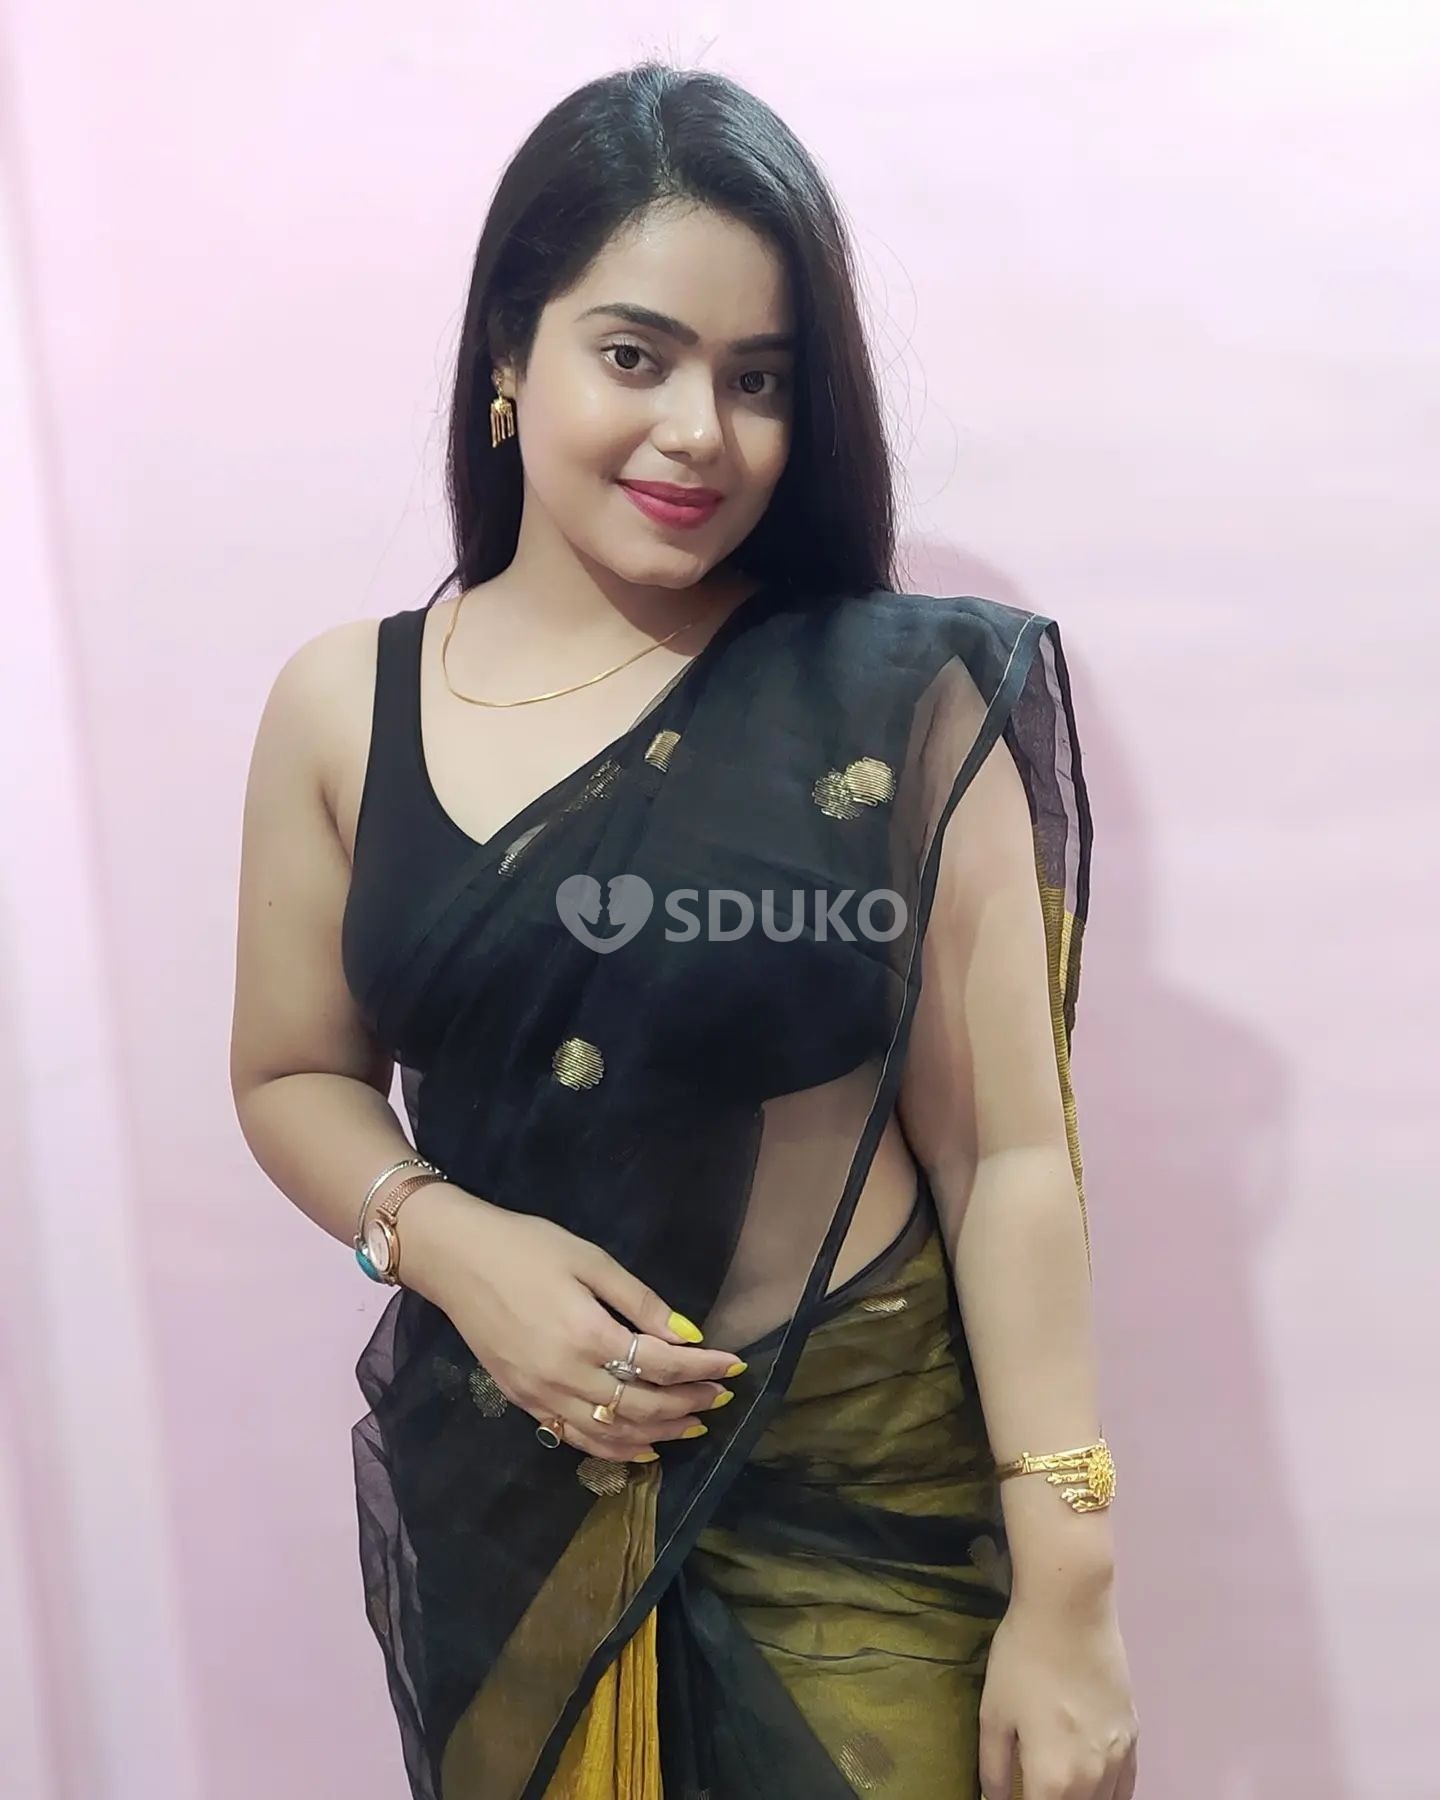 BEGUMPET 💯% SAFE AND SECURE TODAY LOW PRICE UNLIMITED ENJOY HOT COLLEGE GIRL HOUSEWIFE AUNTIES AVAI.   .  . ....